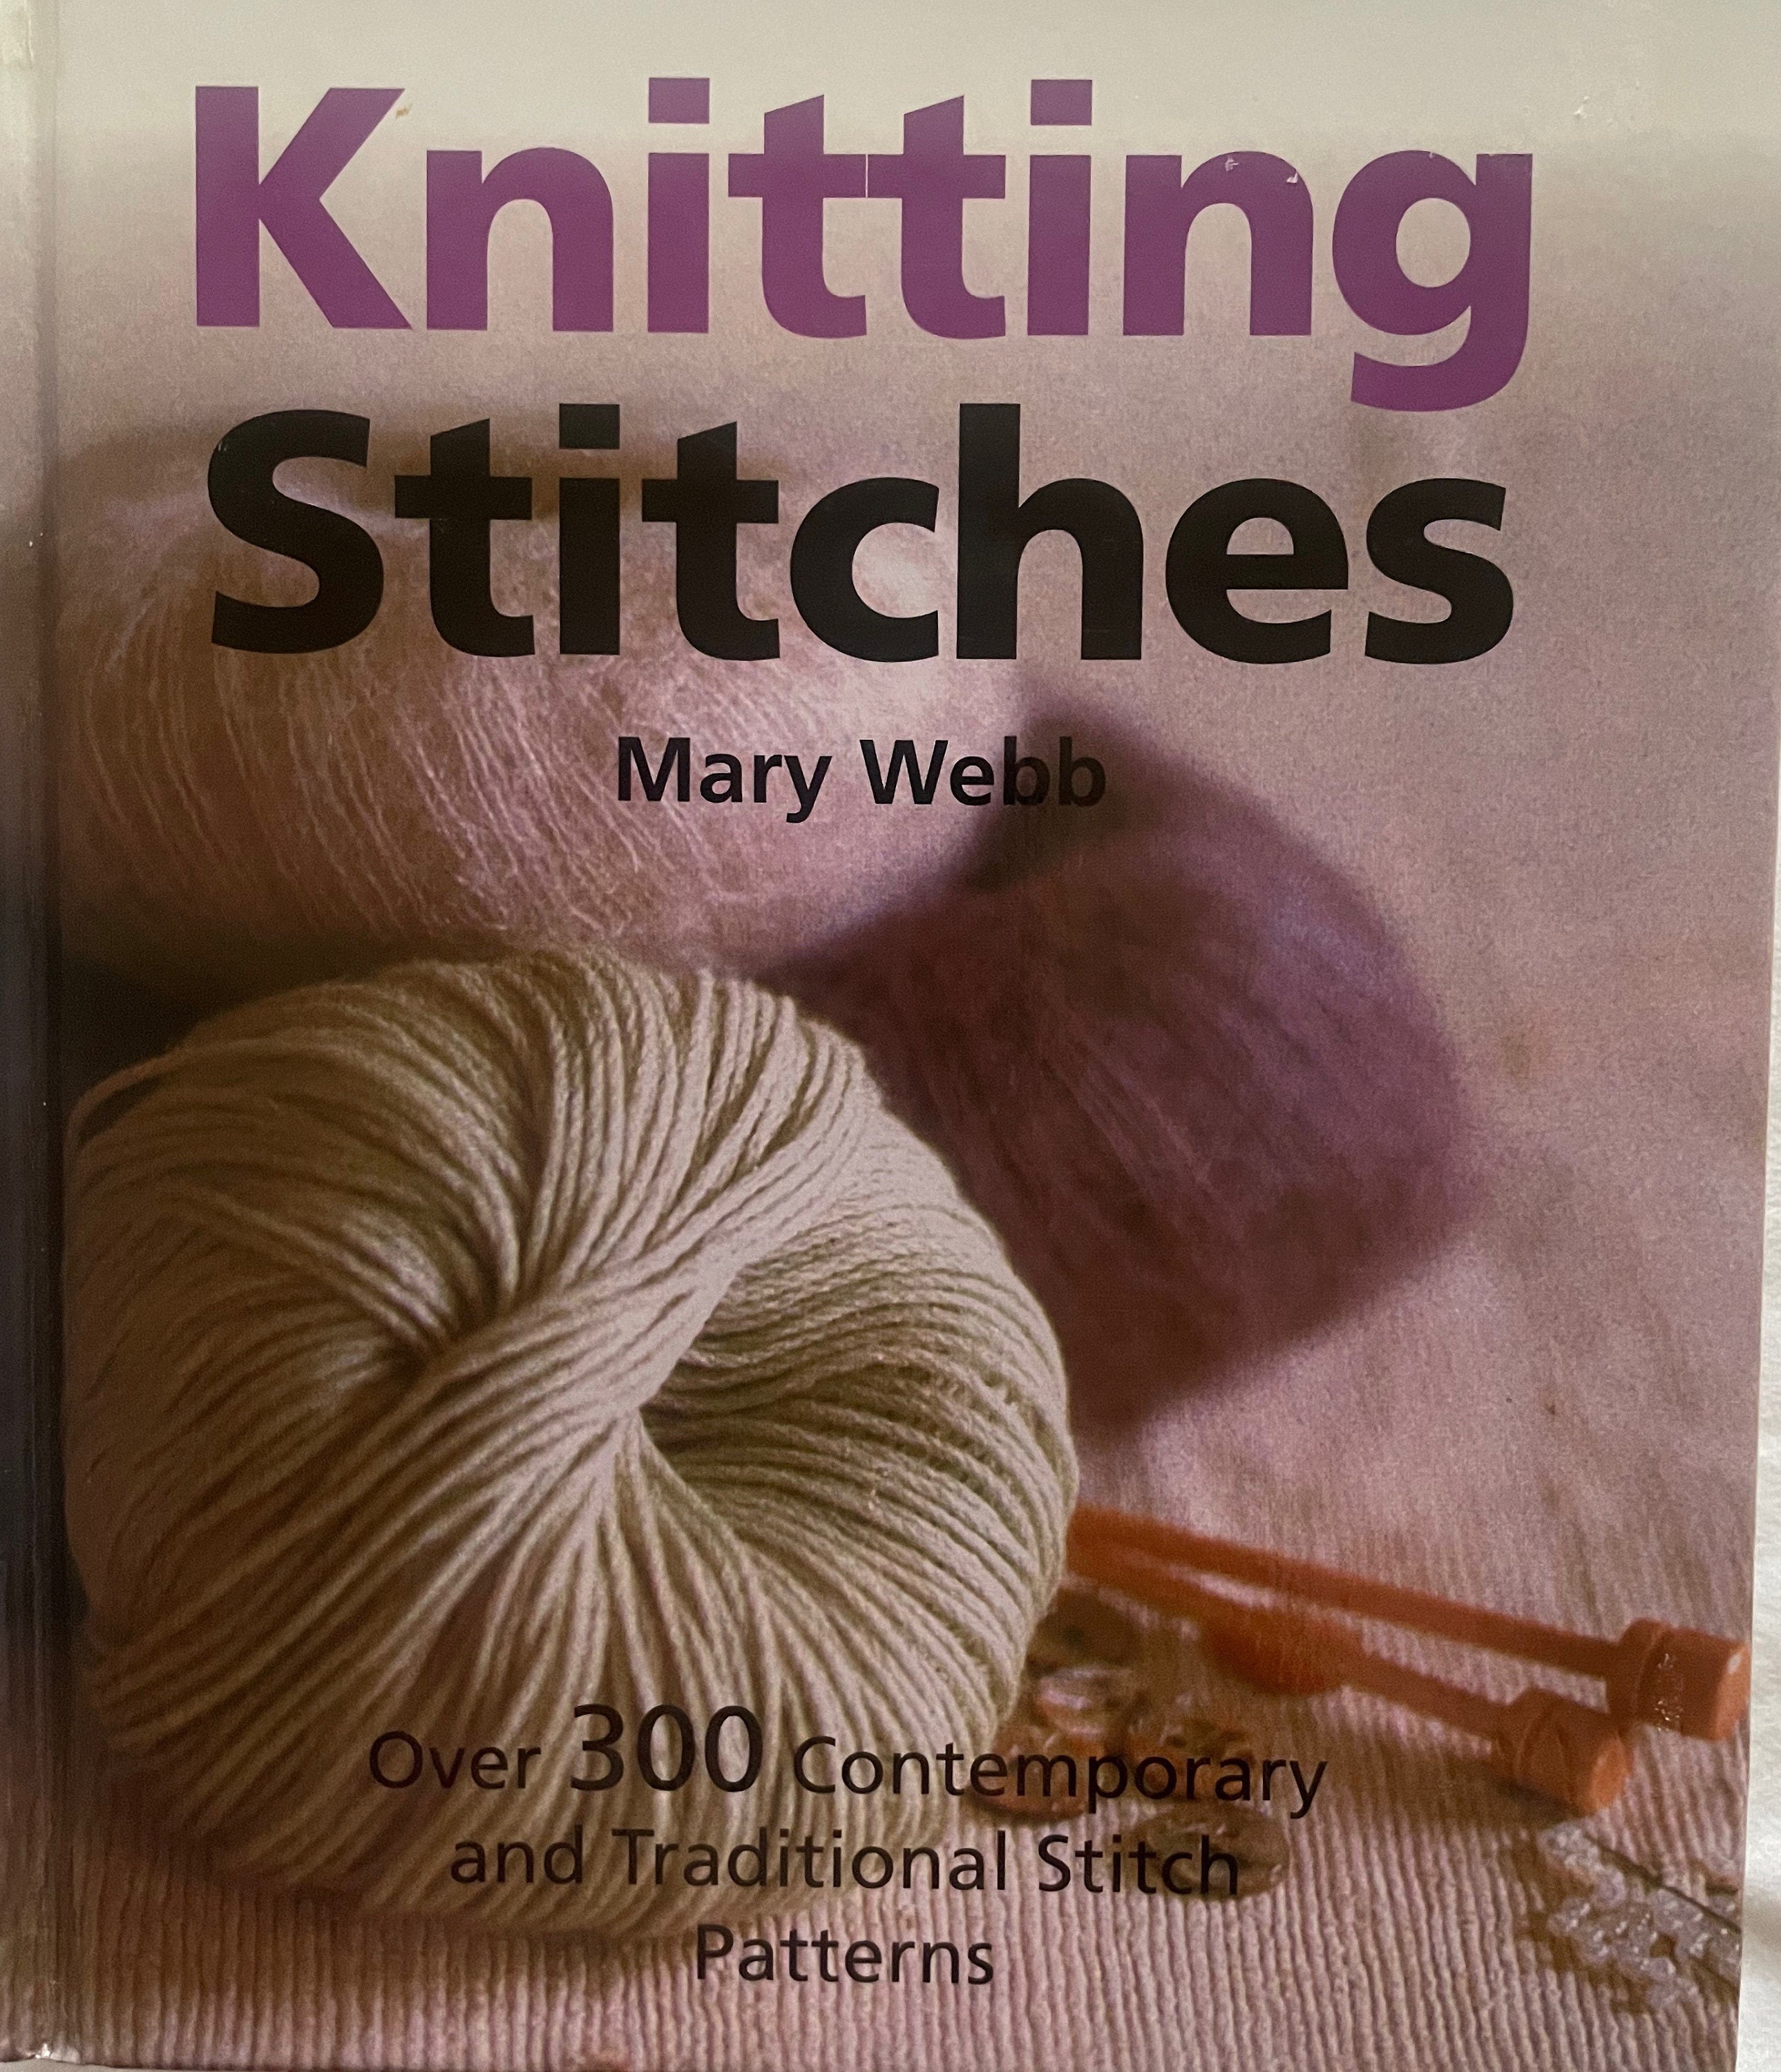 Knitting Book “ Knitting Stitches “ By Mary Webb